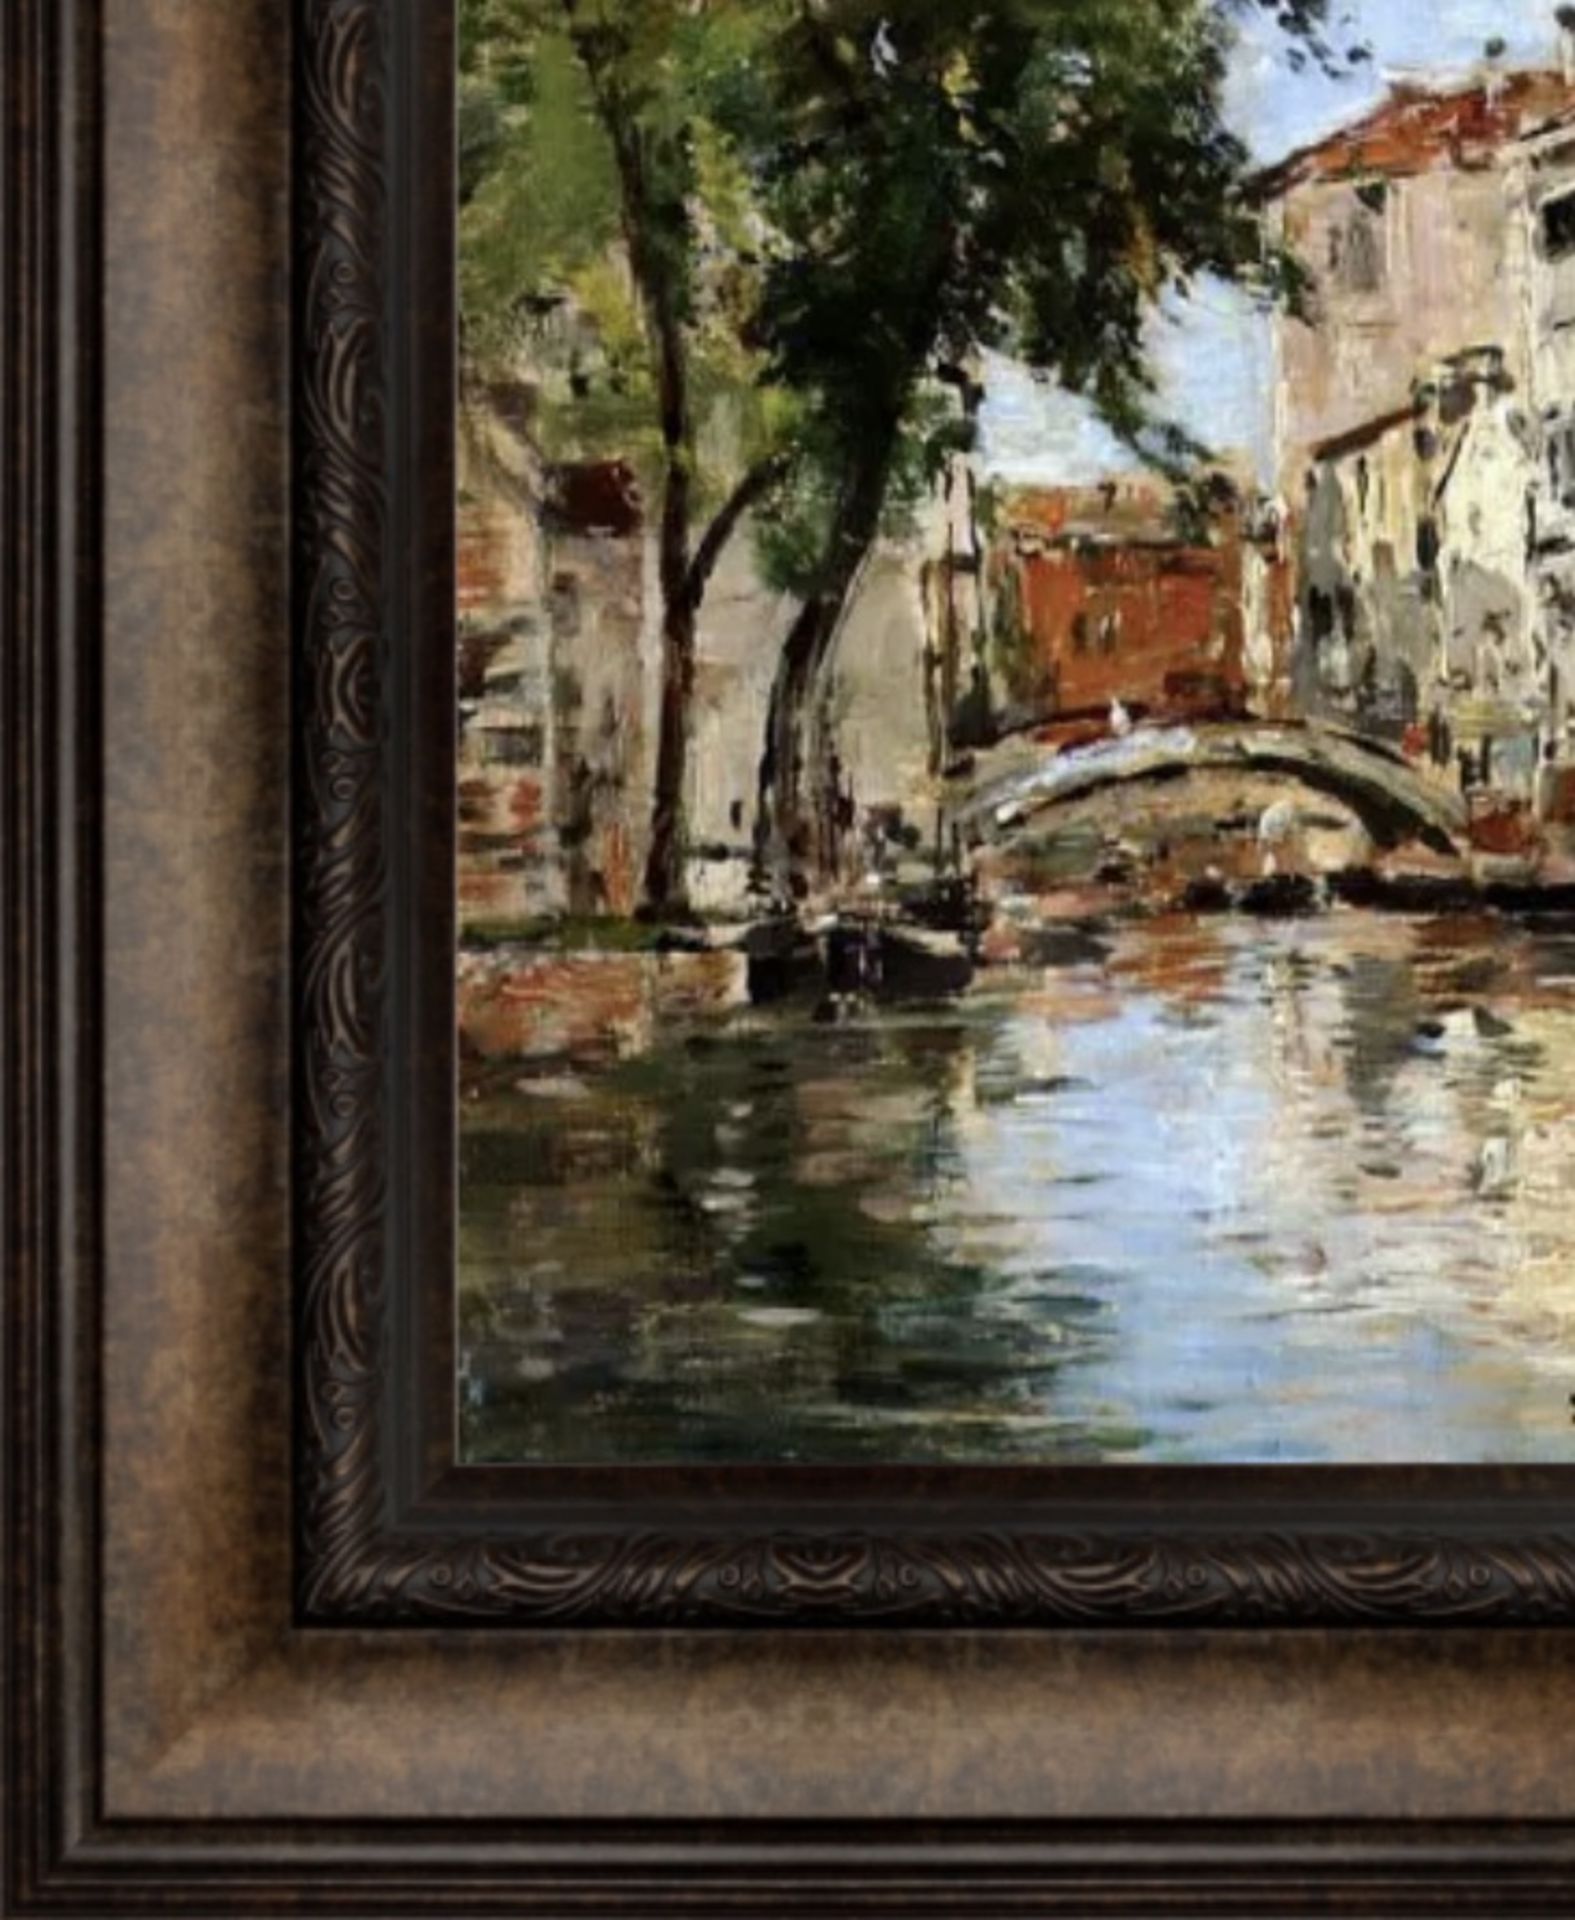 Eugene Boudin "Small Canal in Venice" Painting - Image 5 of 5